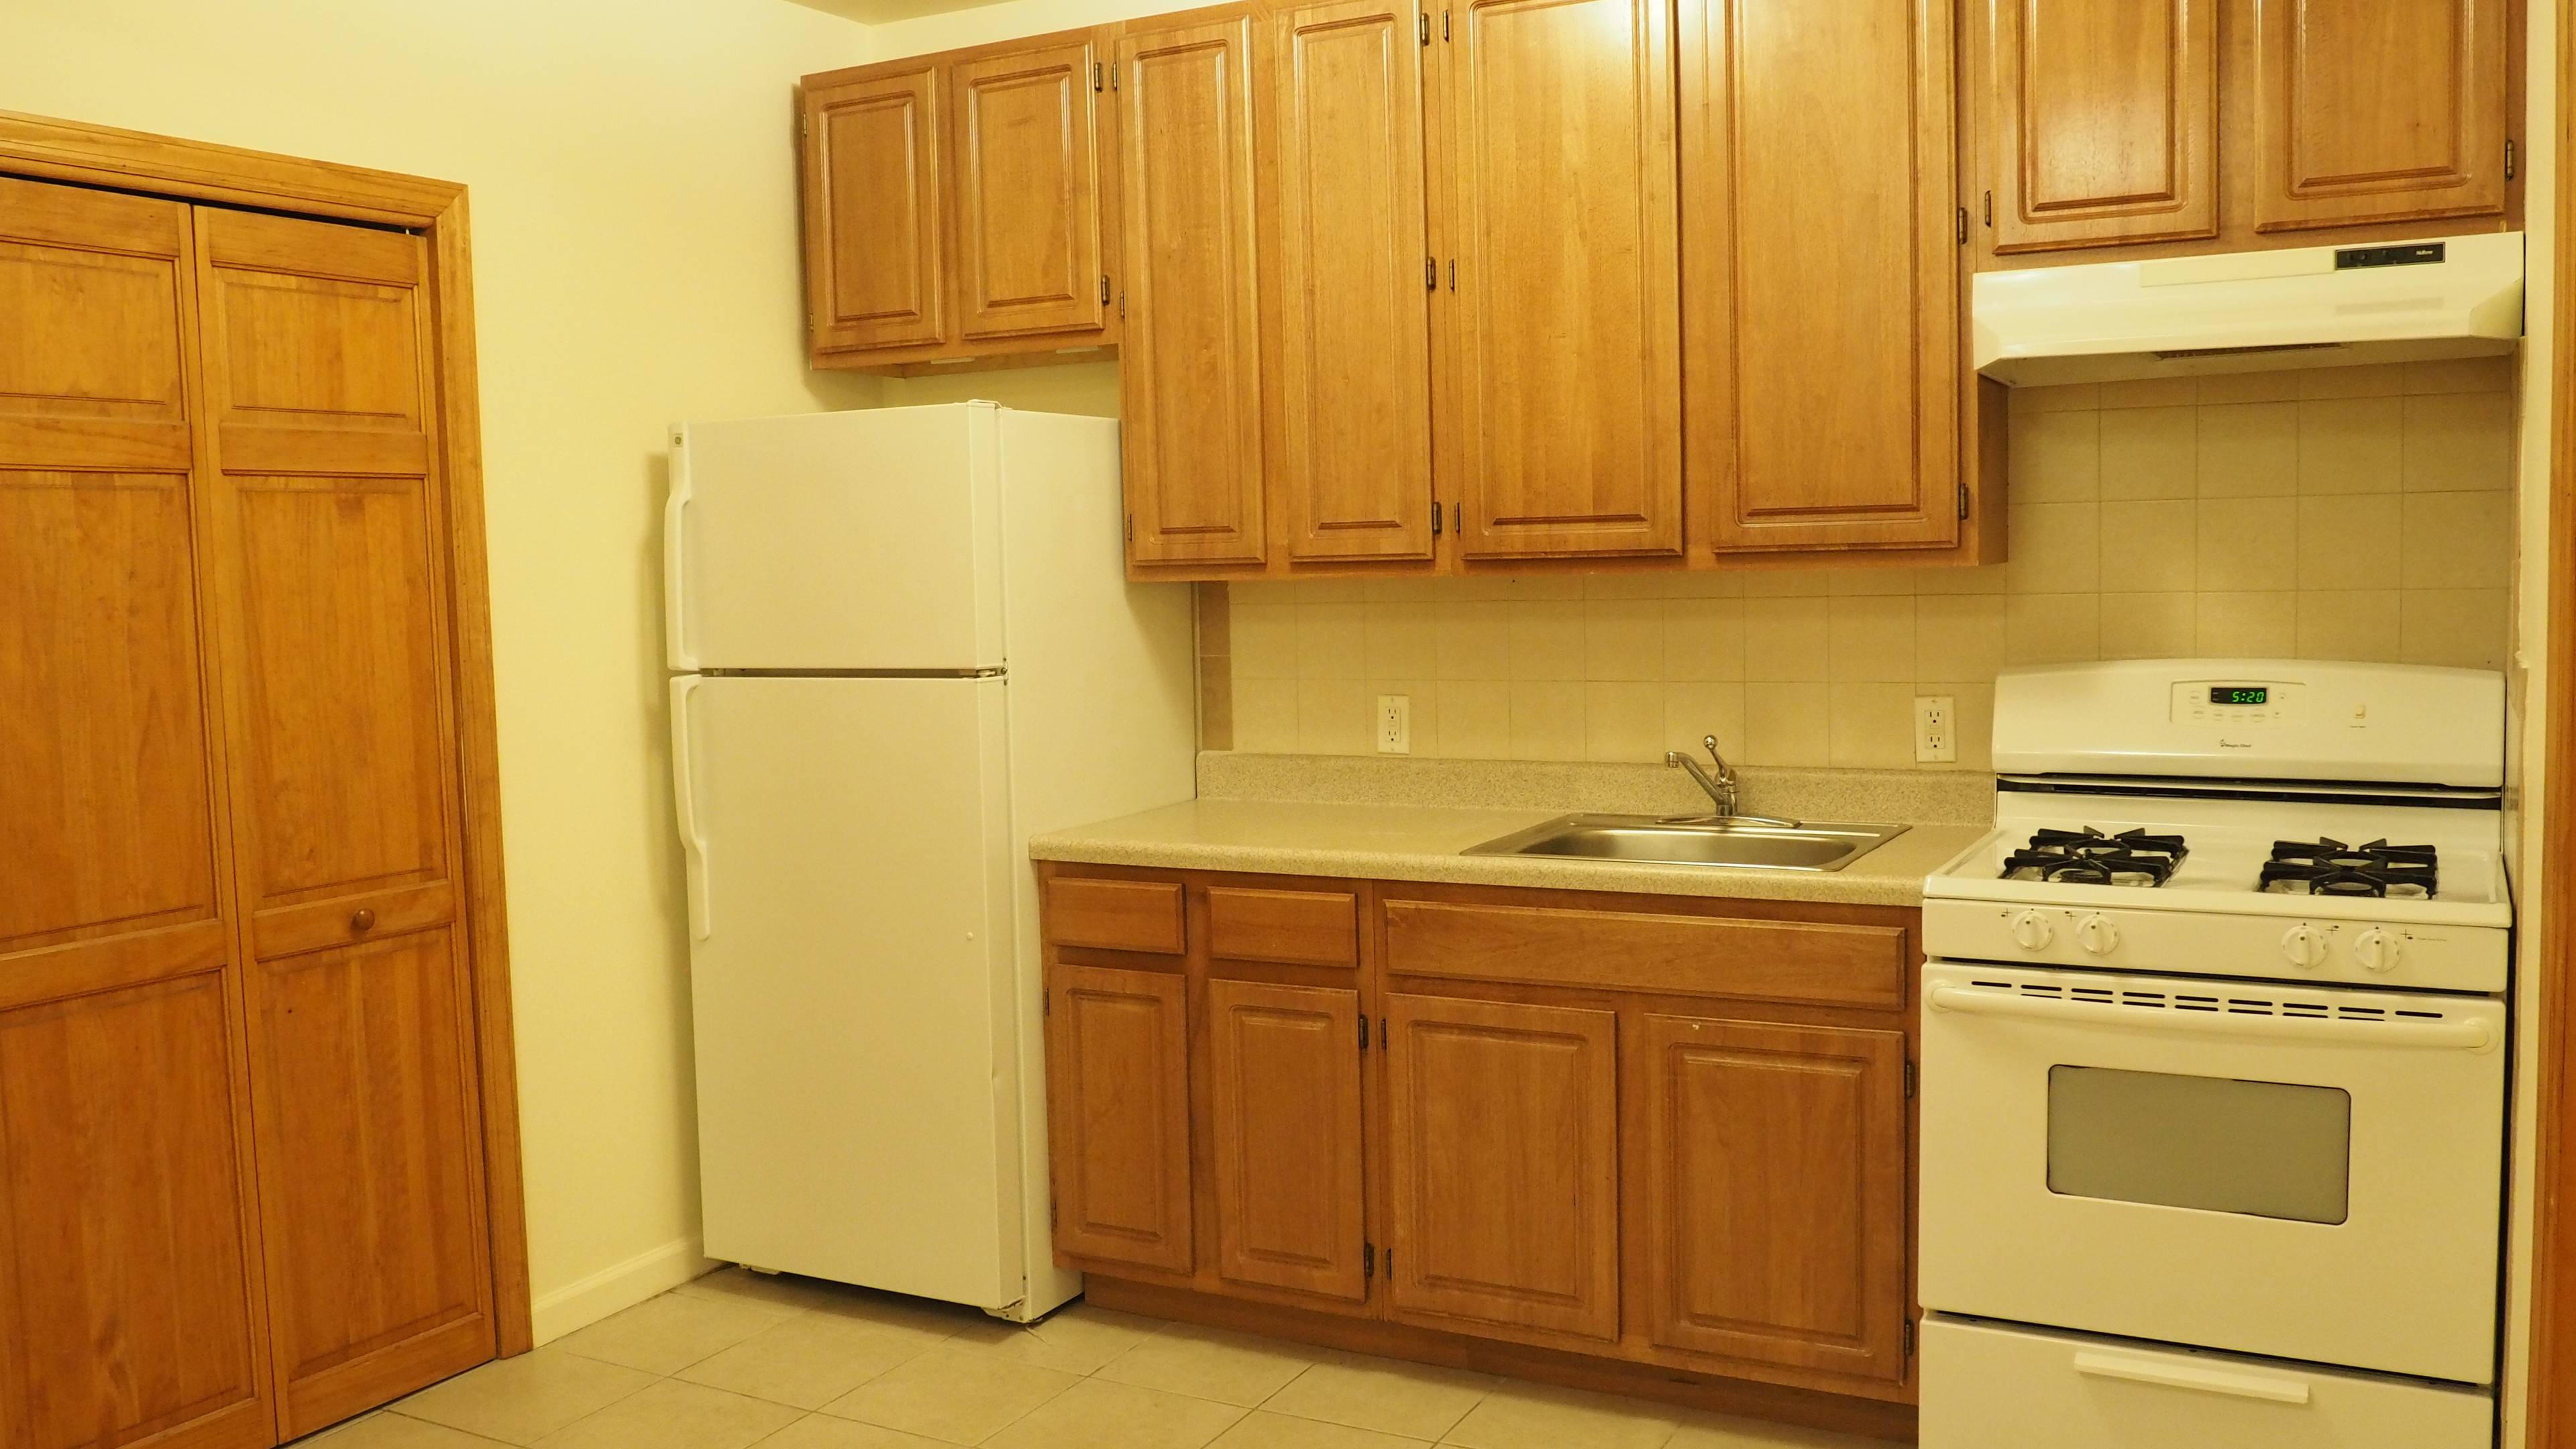 True 2 Bed in PRIME NORTH WILLIAMSBURG!! Steps to the Bedford Ave L Train!